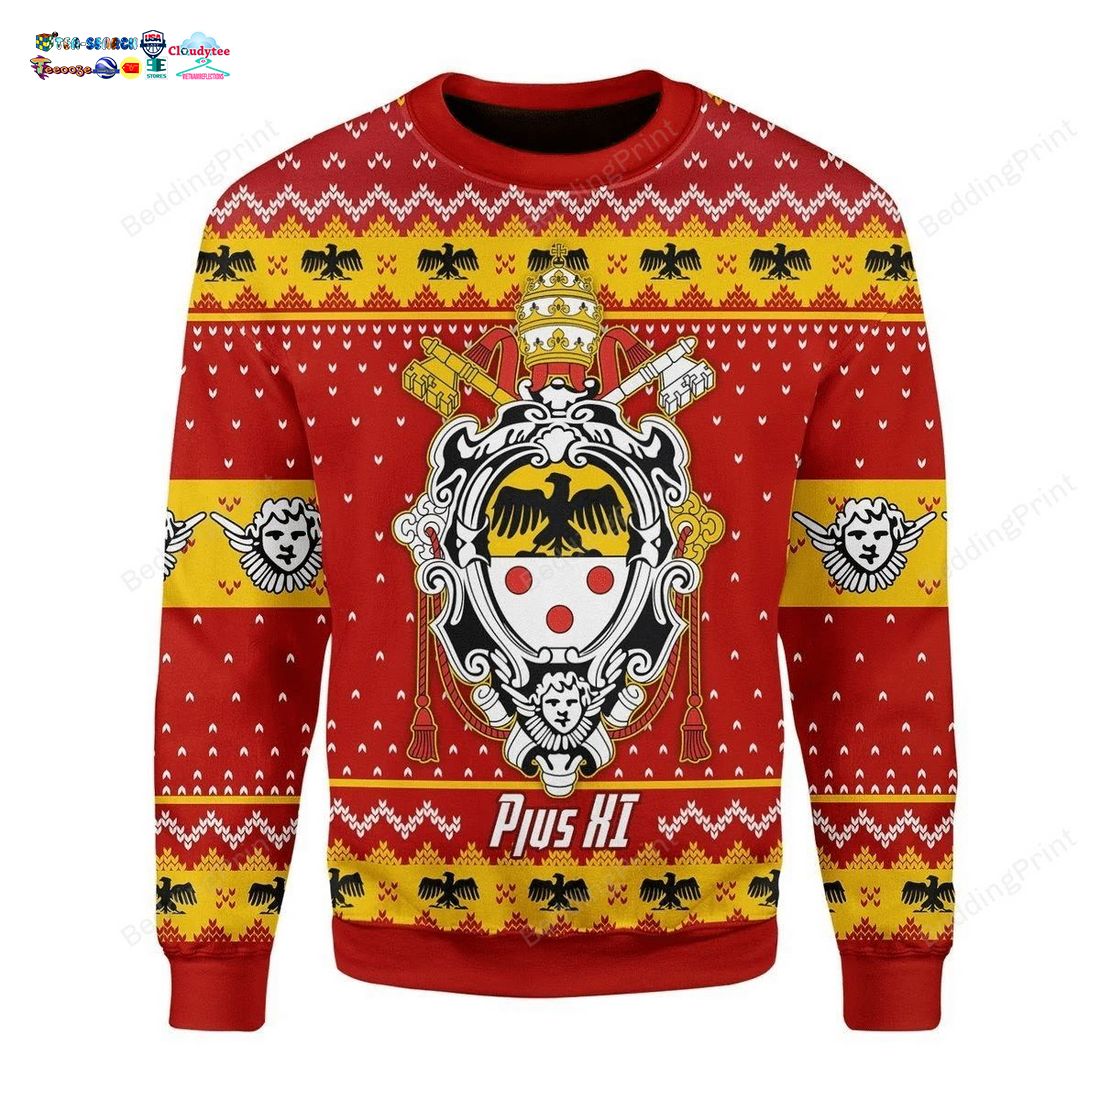 Pope Pius XI Ugly Christmas Sweater - Super sober